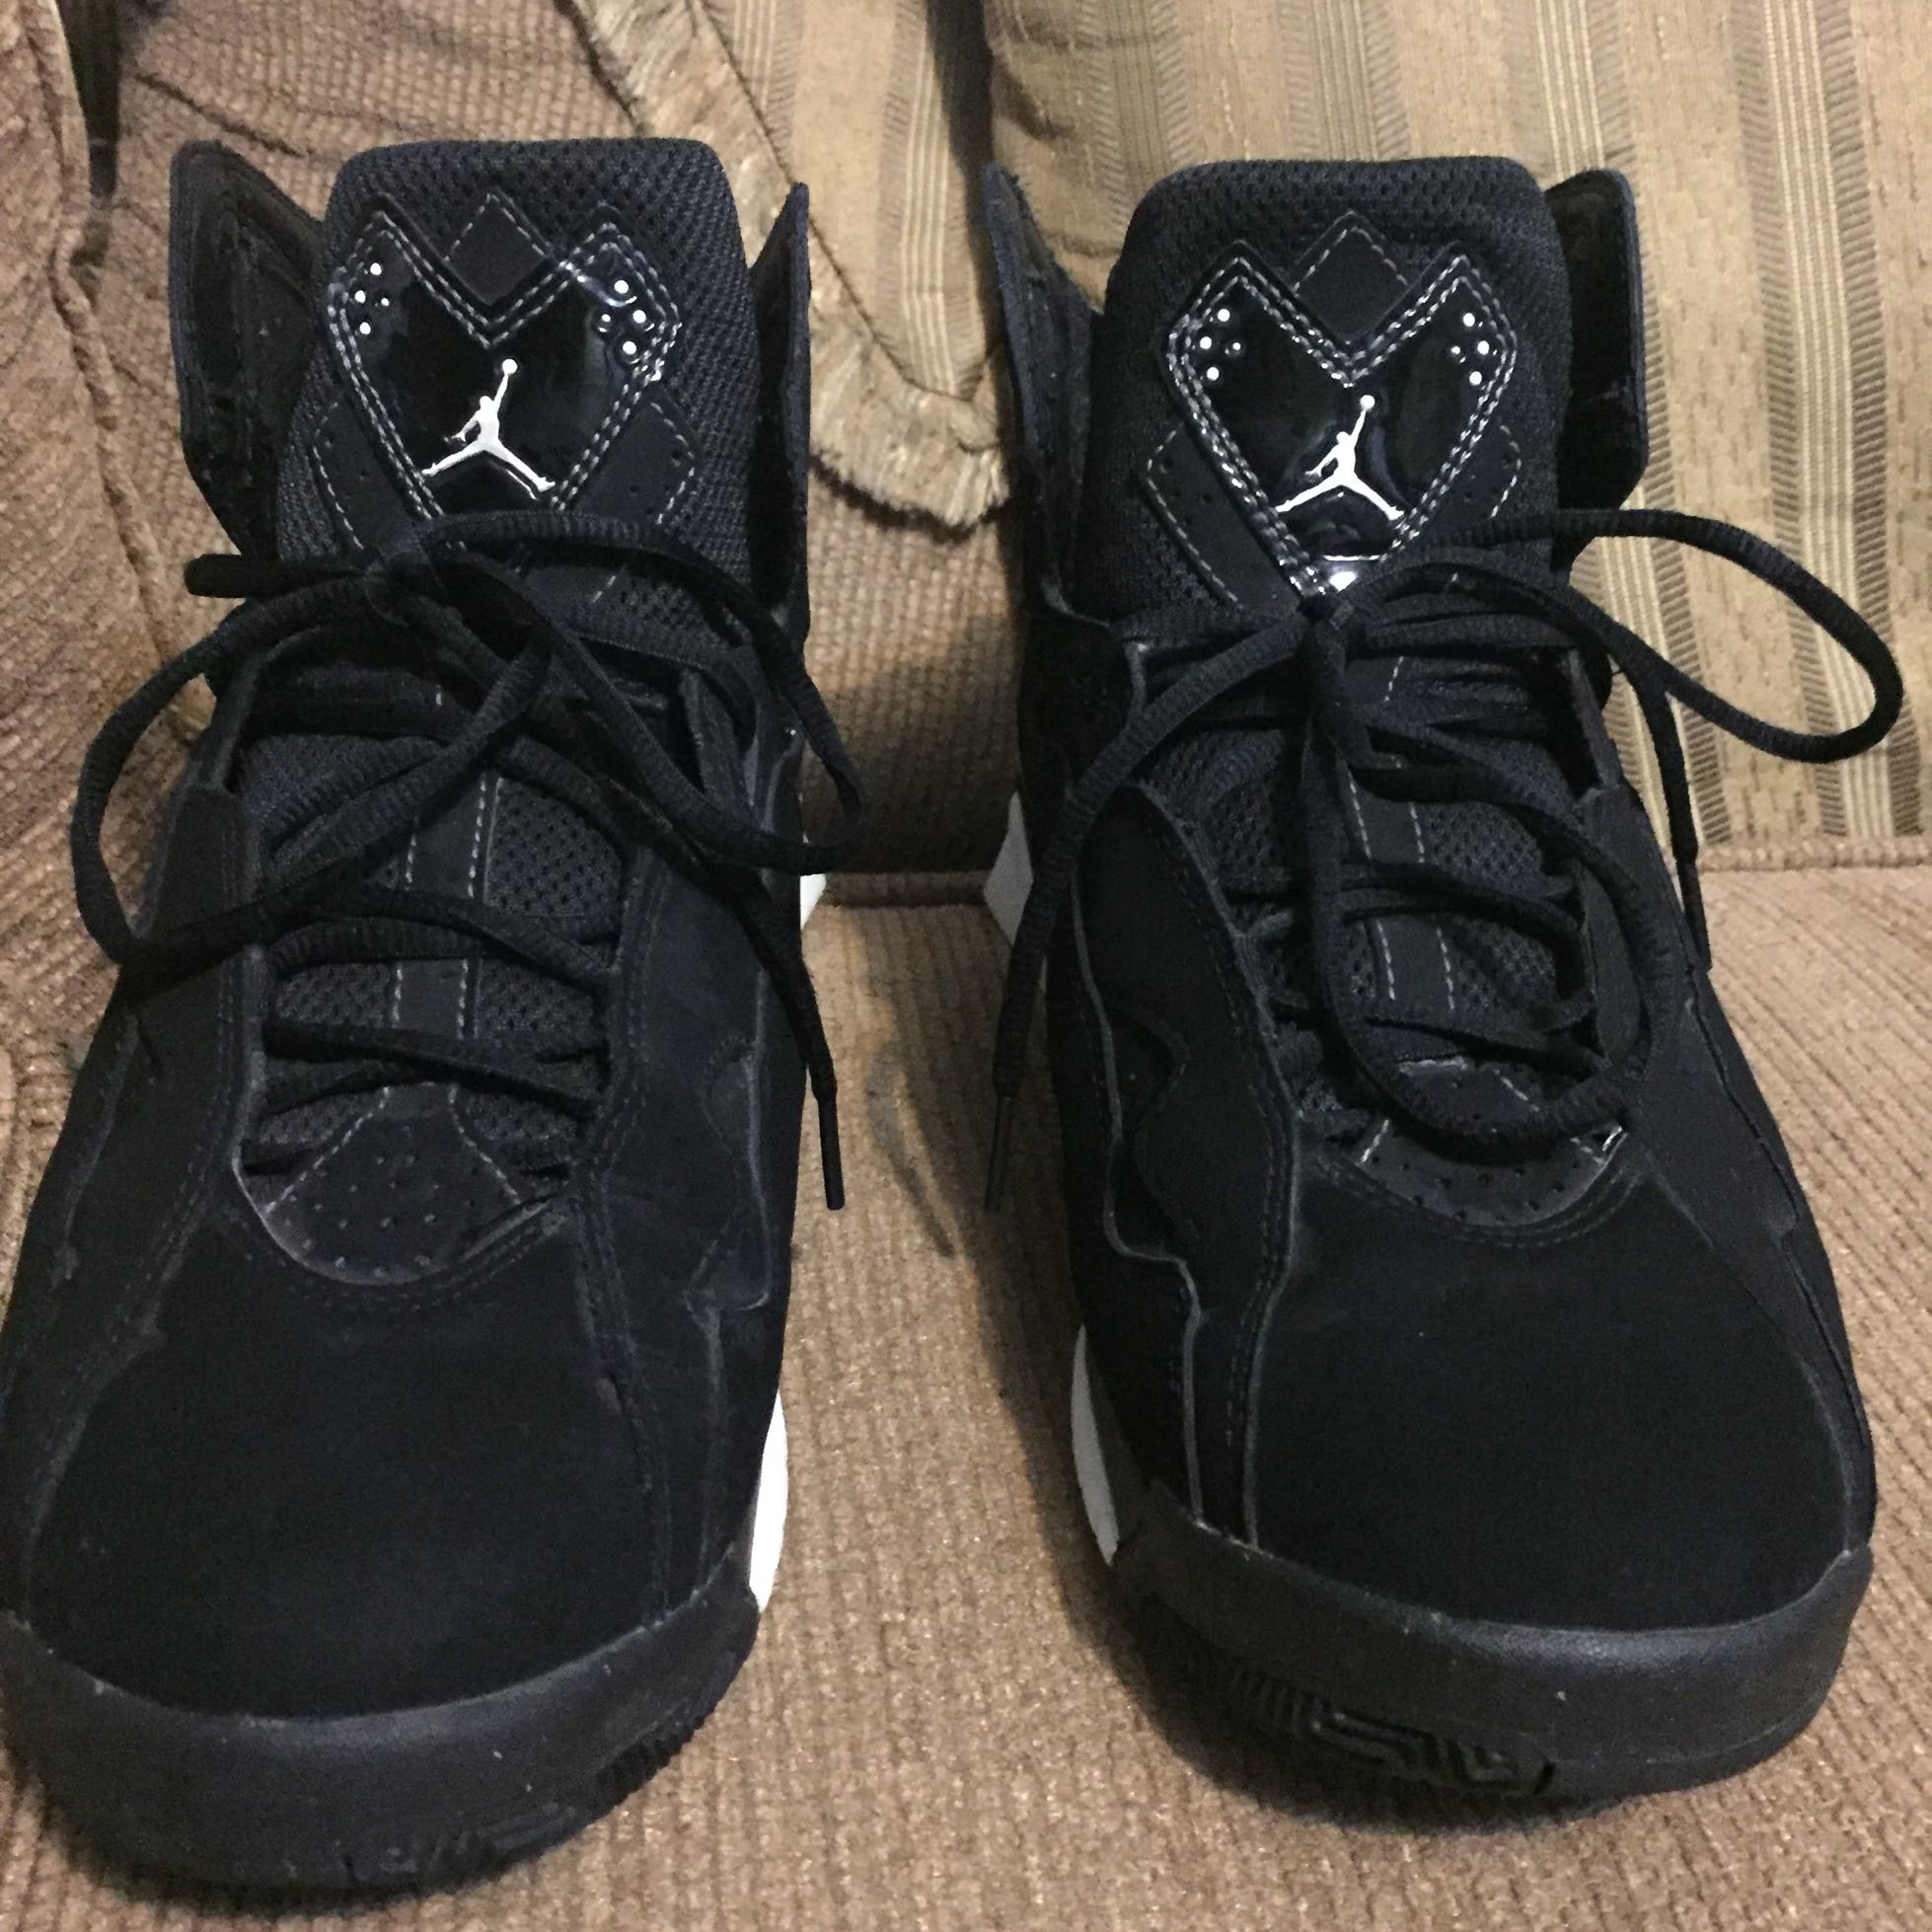 Jordan retro 7 oreos size 11 for sale in New York, NY - 5miles: Buy and ...